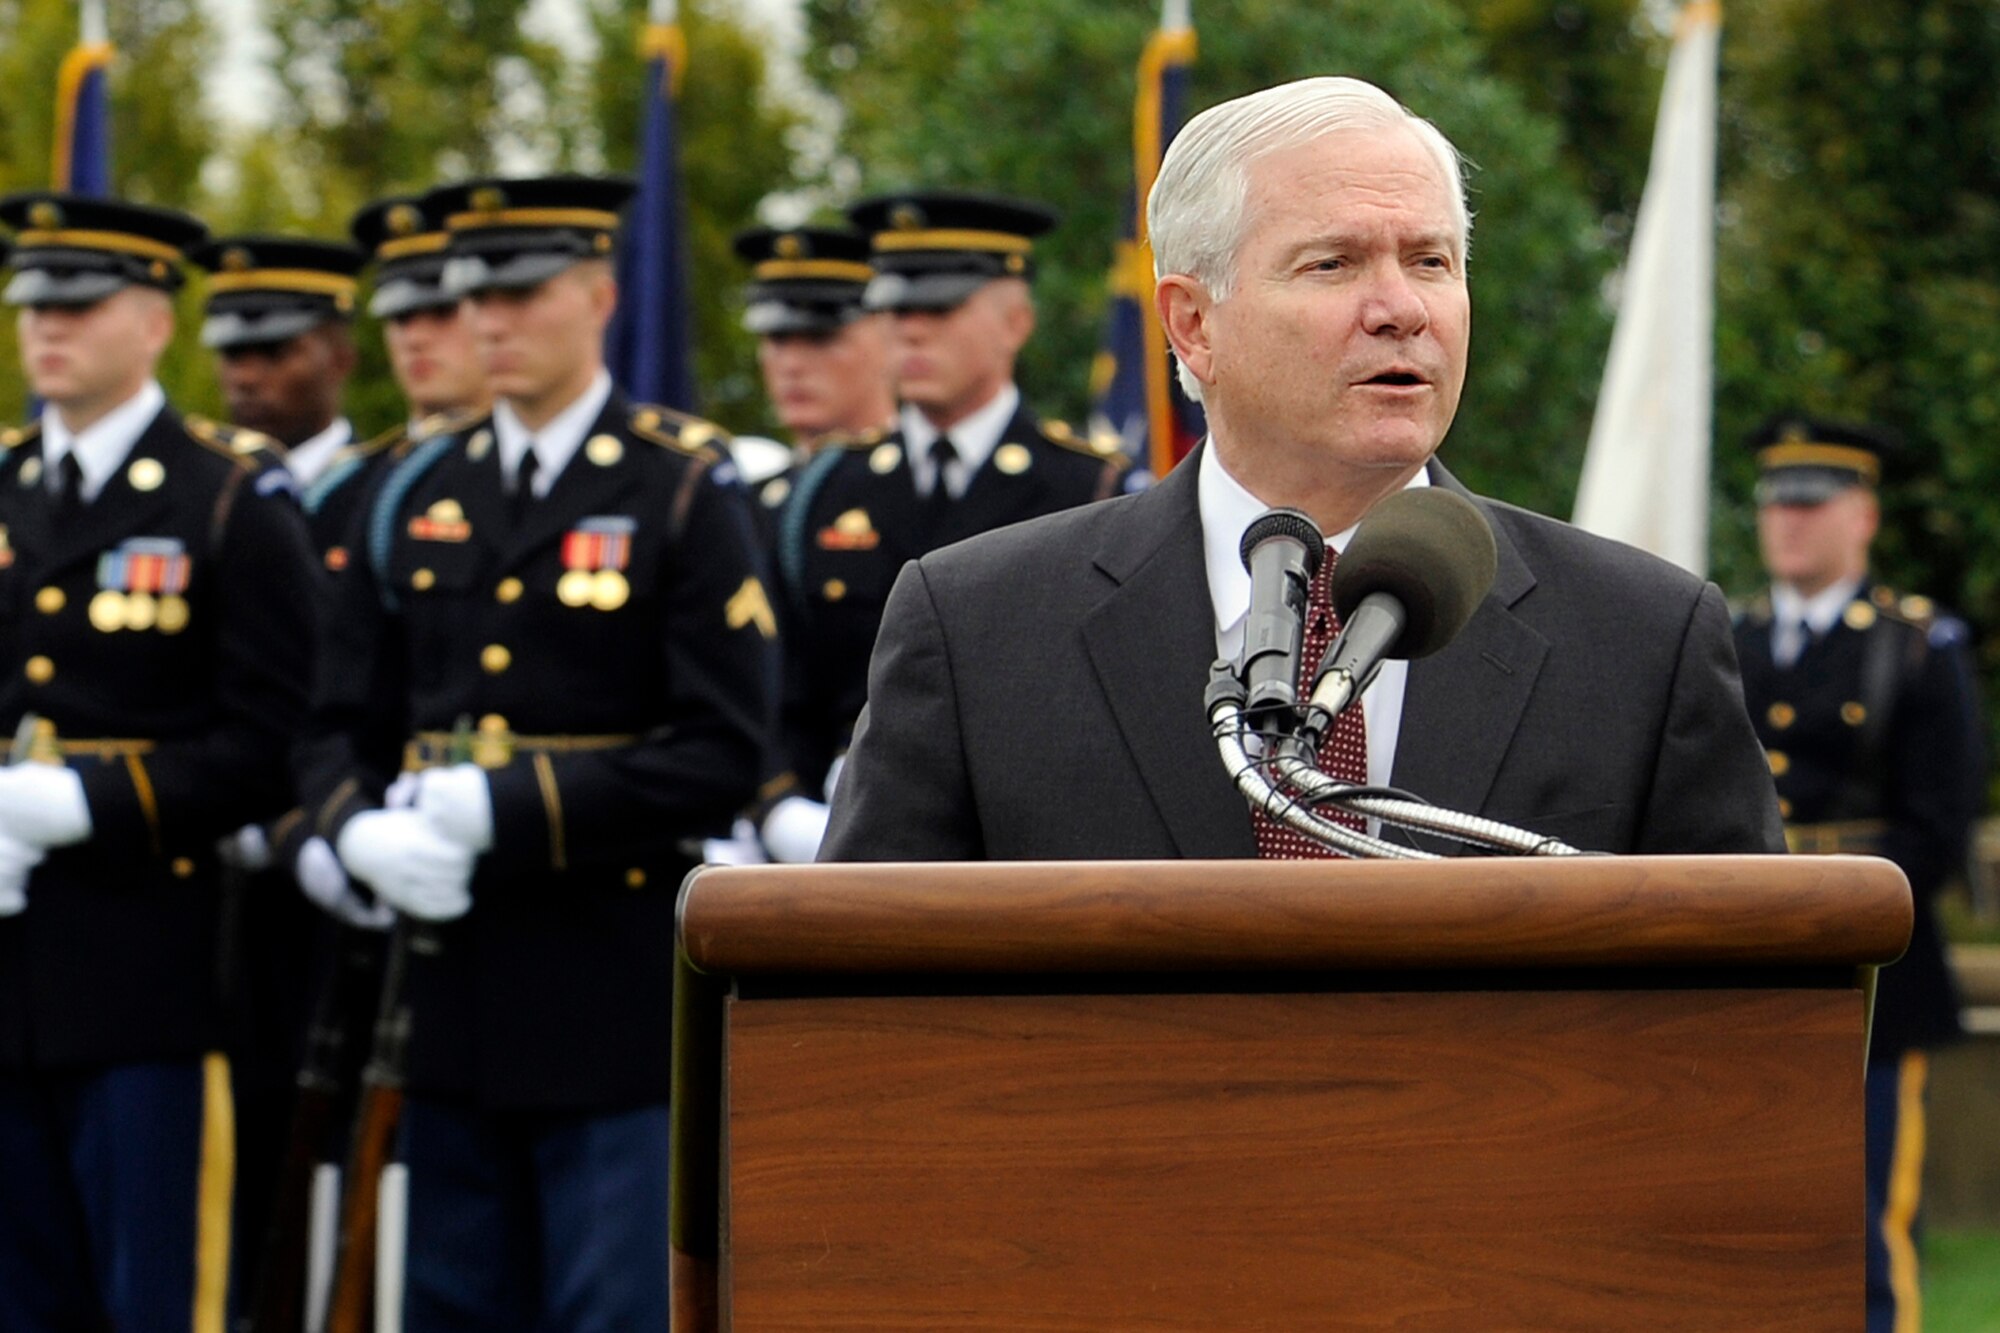 Defense Secretary Robert M. Gates addresses the audience during the National POW/MIA Recognition Day Ceremony at the Pentagon, Sept. 18, 2009. (Department of Defense photo/Cherie Cullen)